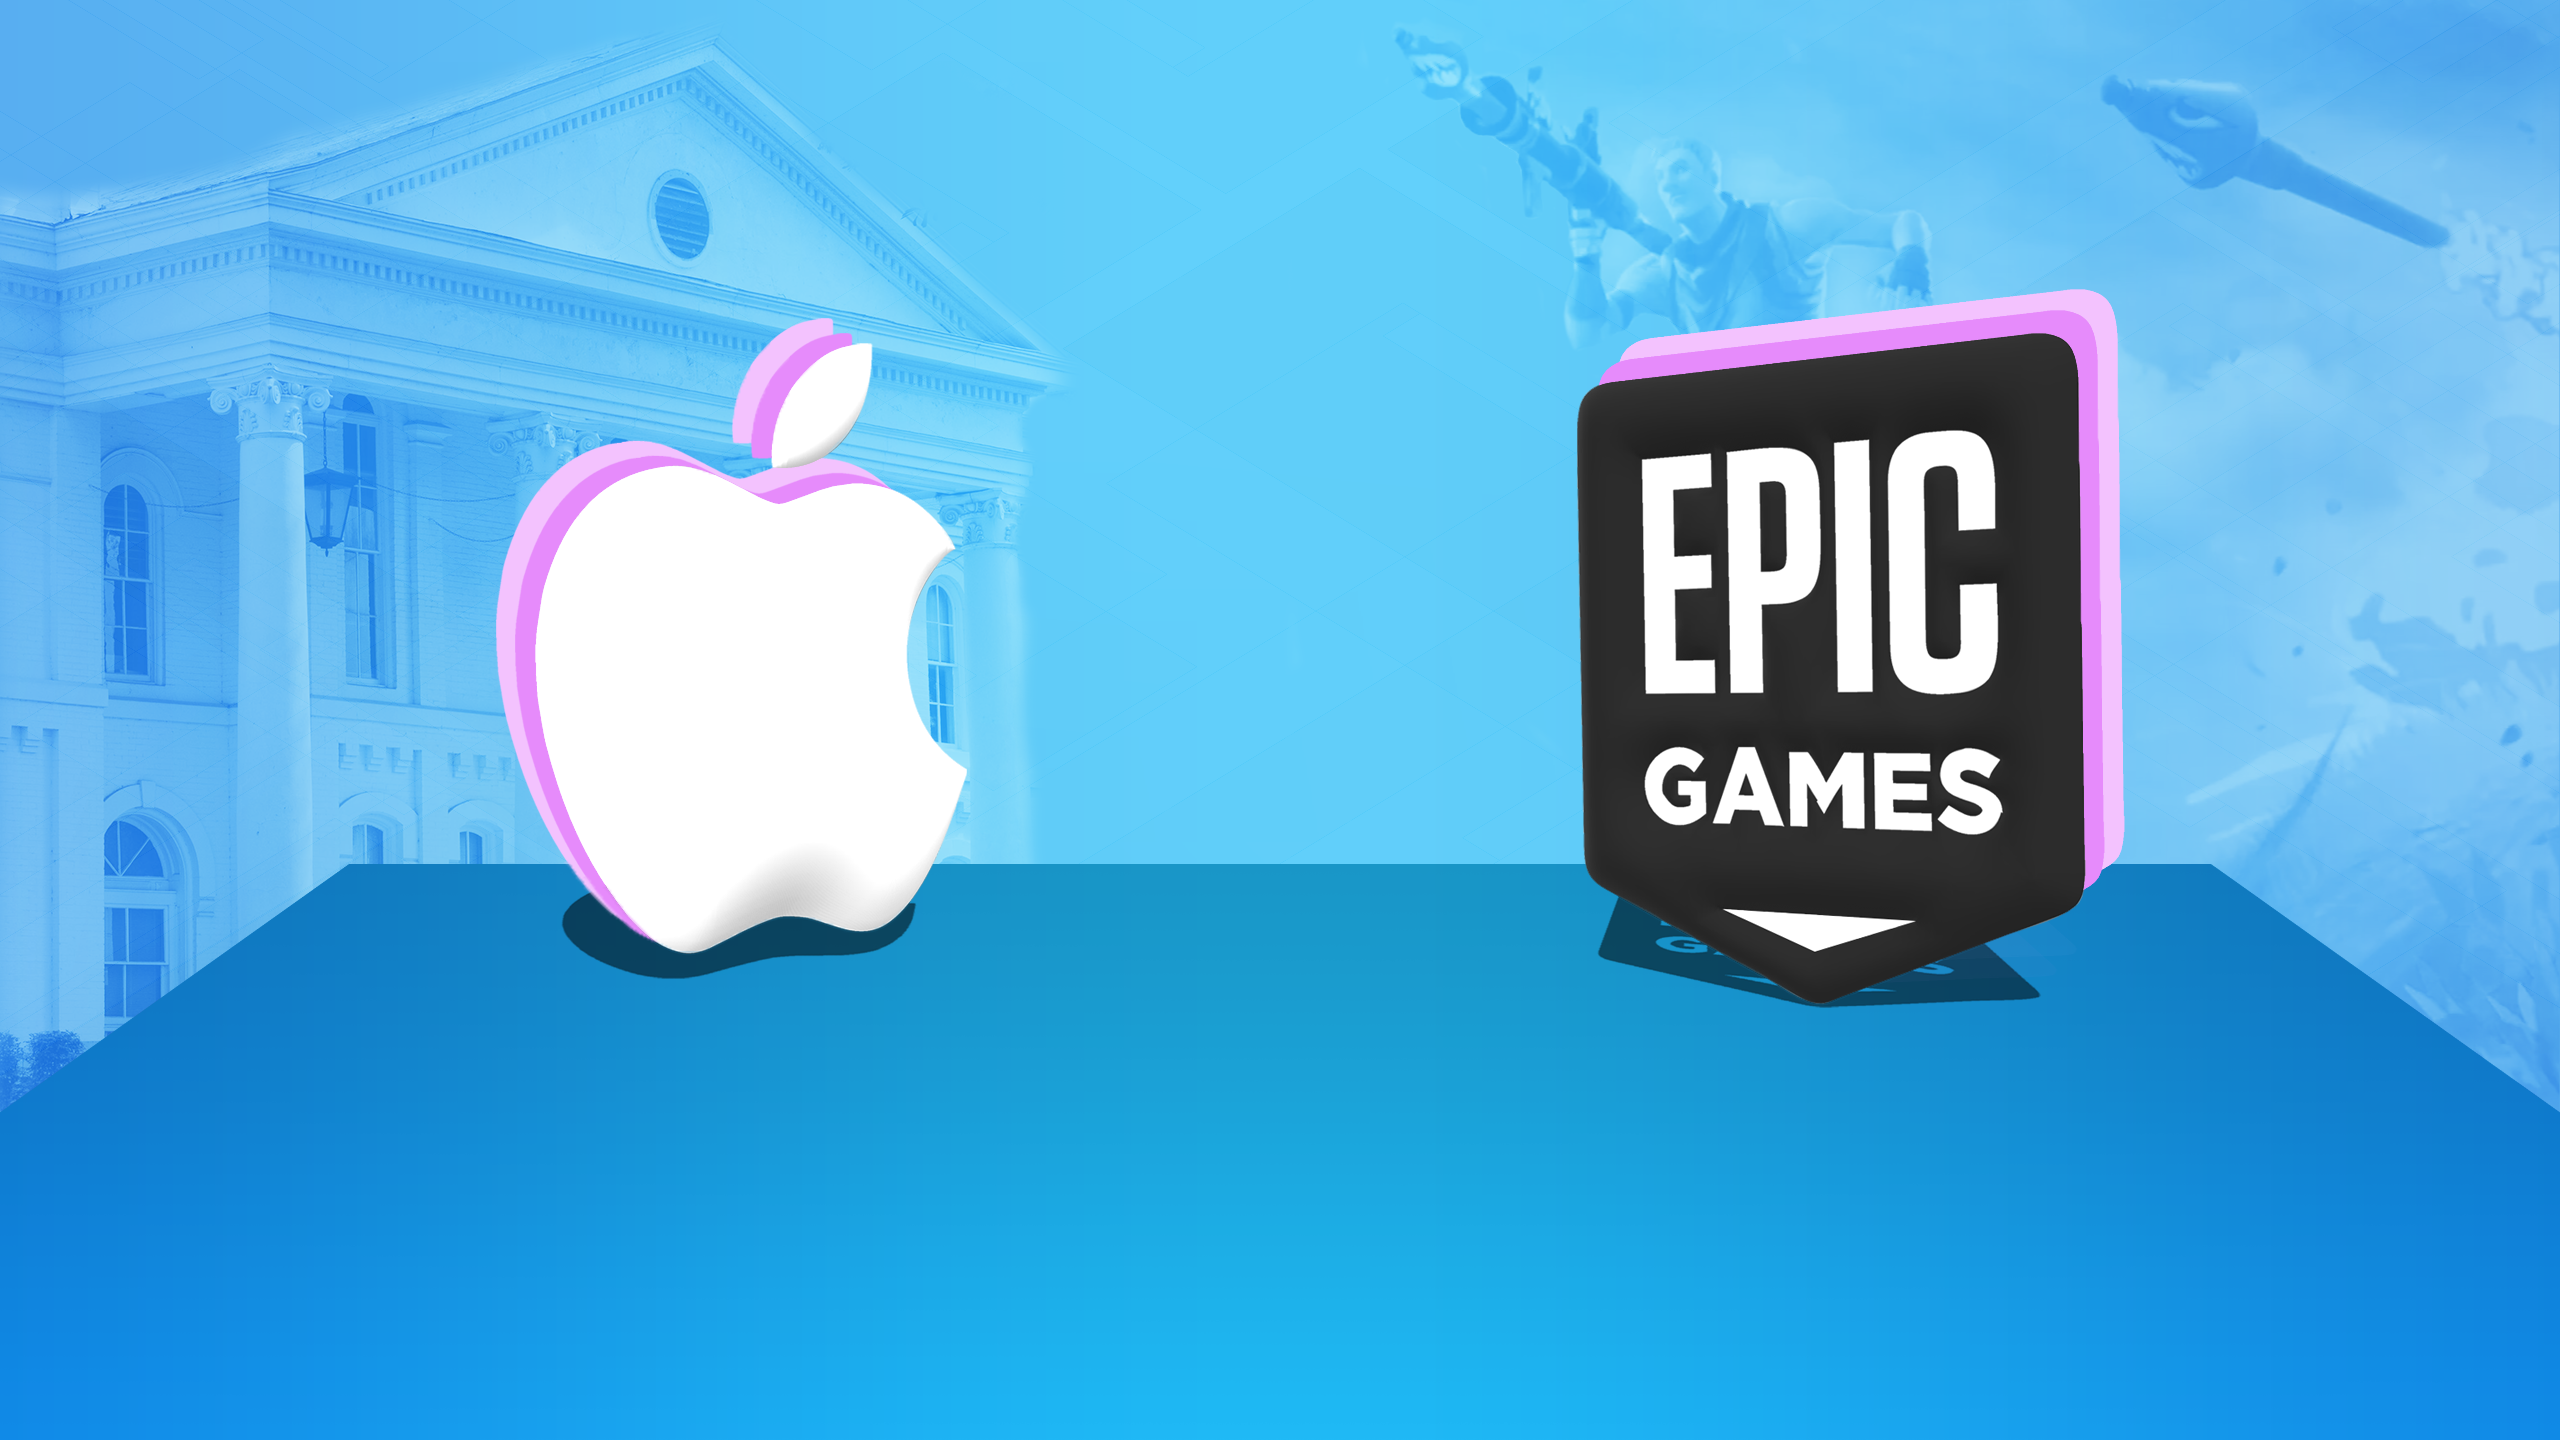 Apple's fight with Epic Games is part of a larger antitrust battle